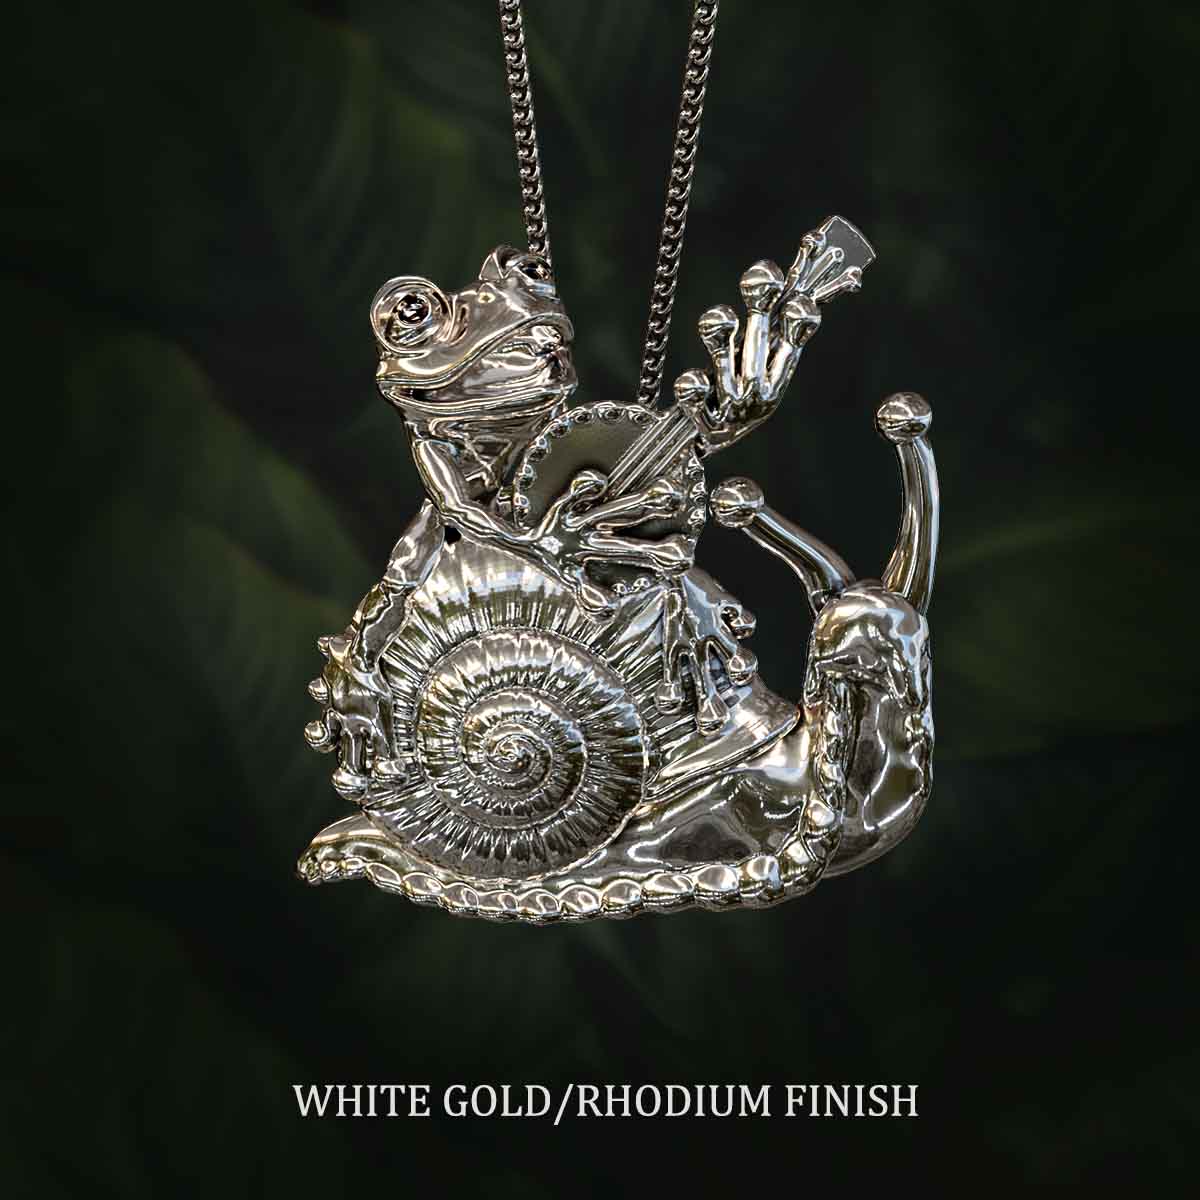    White-Gold-Rhodium-Finish-Serenading-Frog-and-Snail-Pendant-Jewelry-For-Necklace